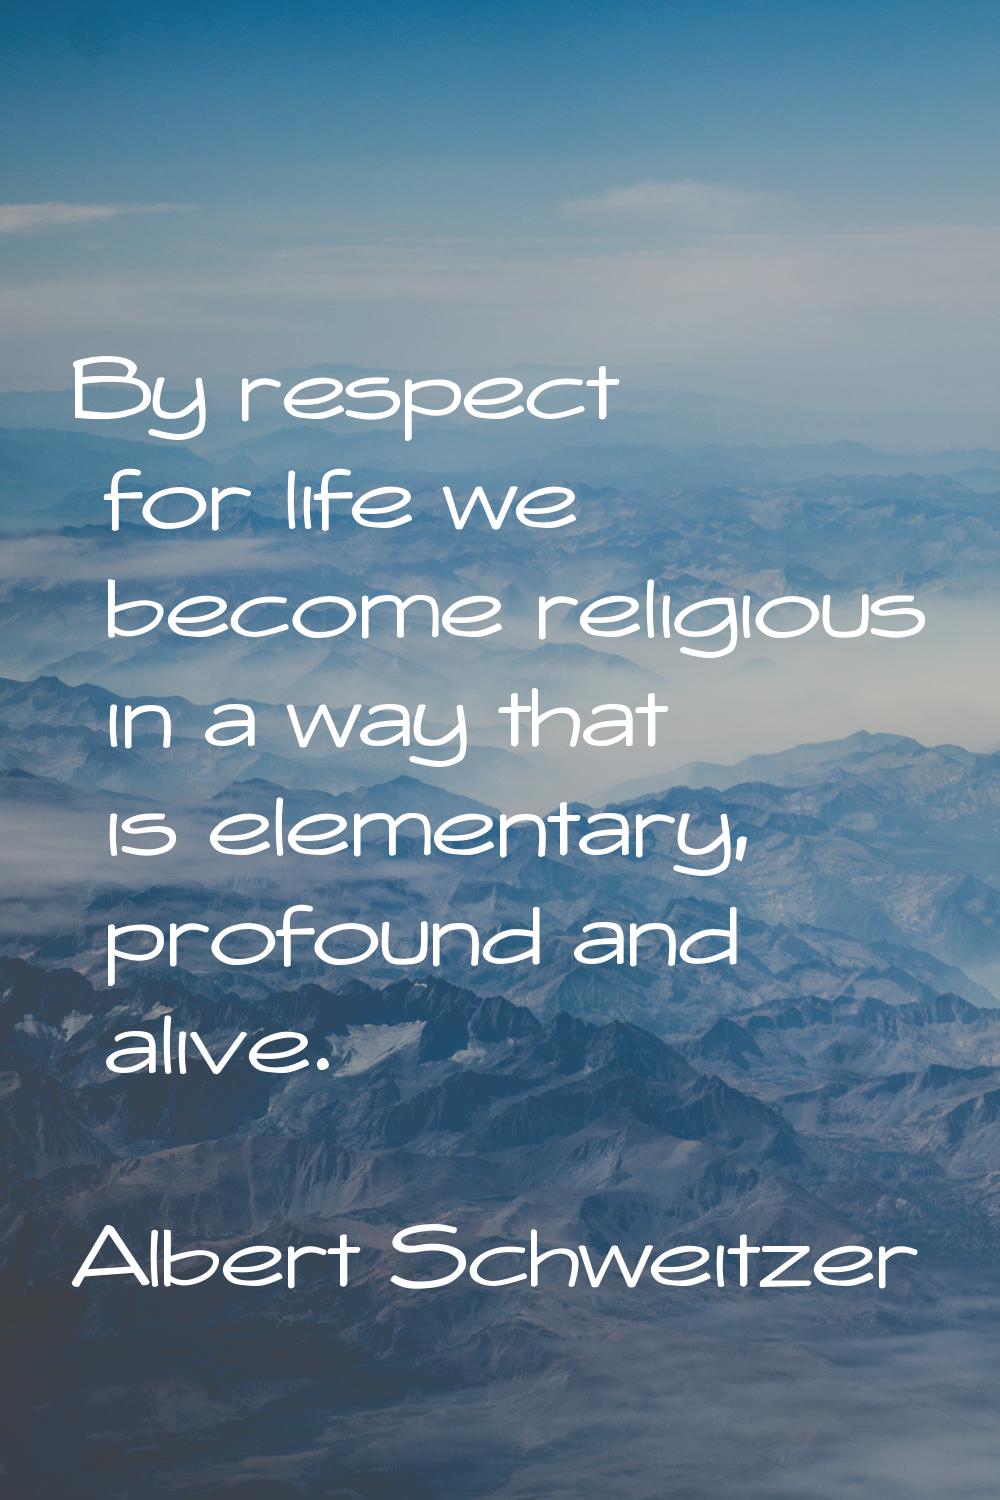 By respect for life we become religious in a way that is elementary, profound and alive.